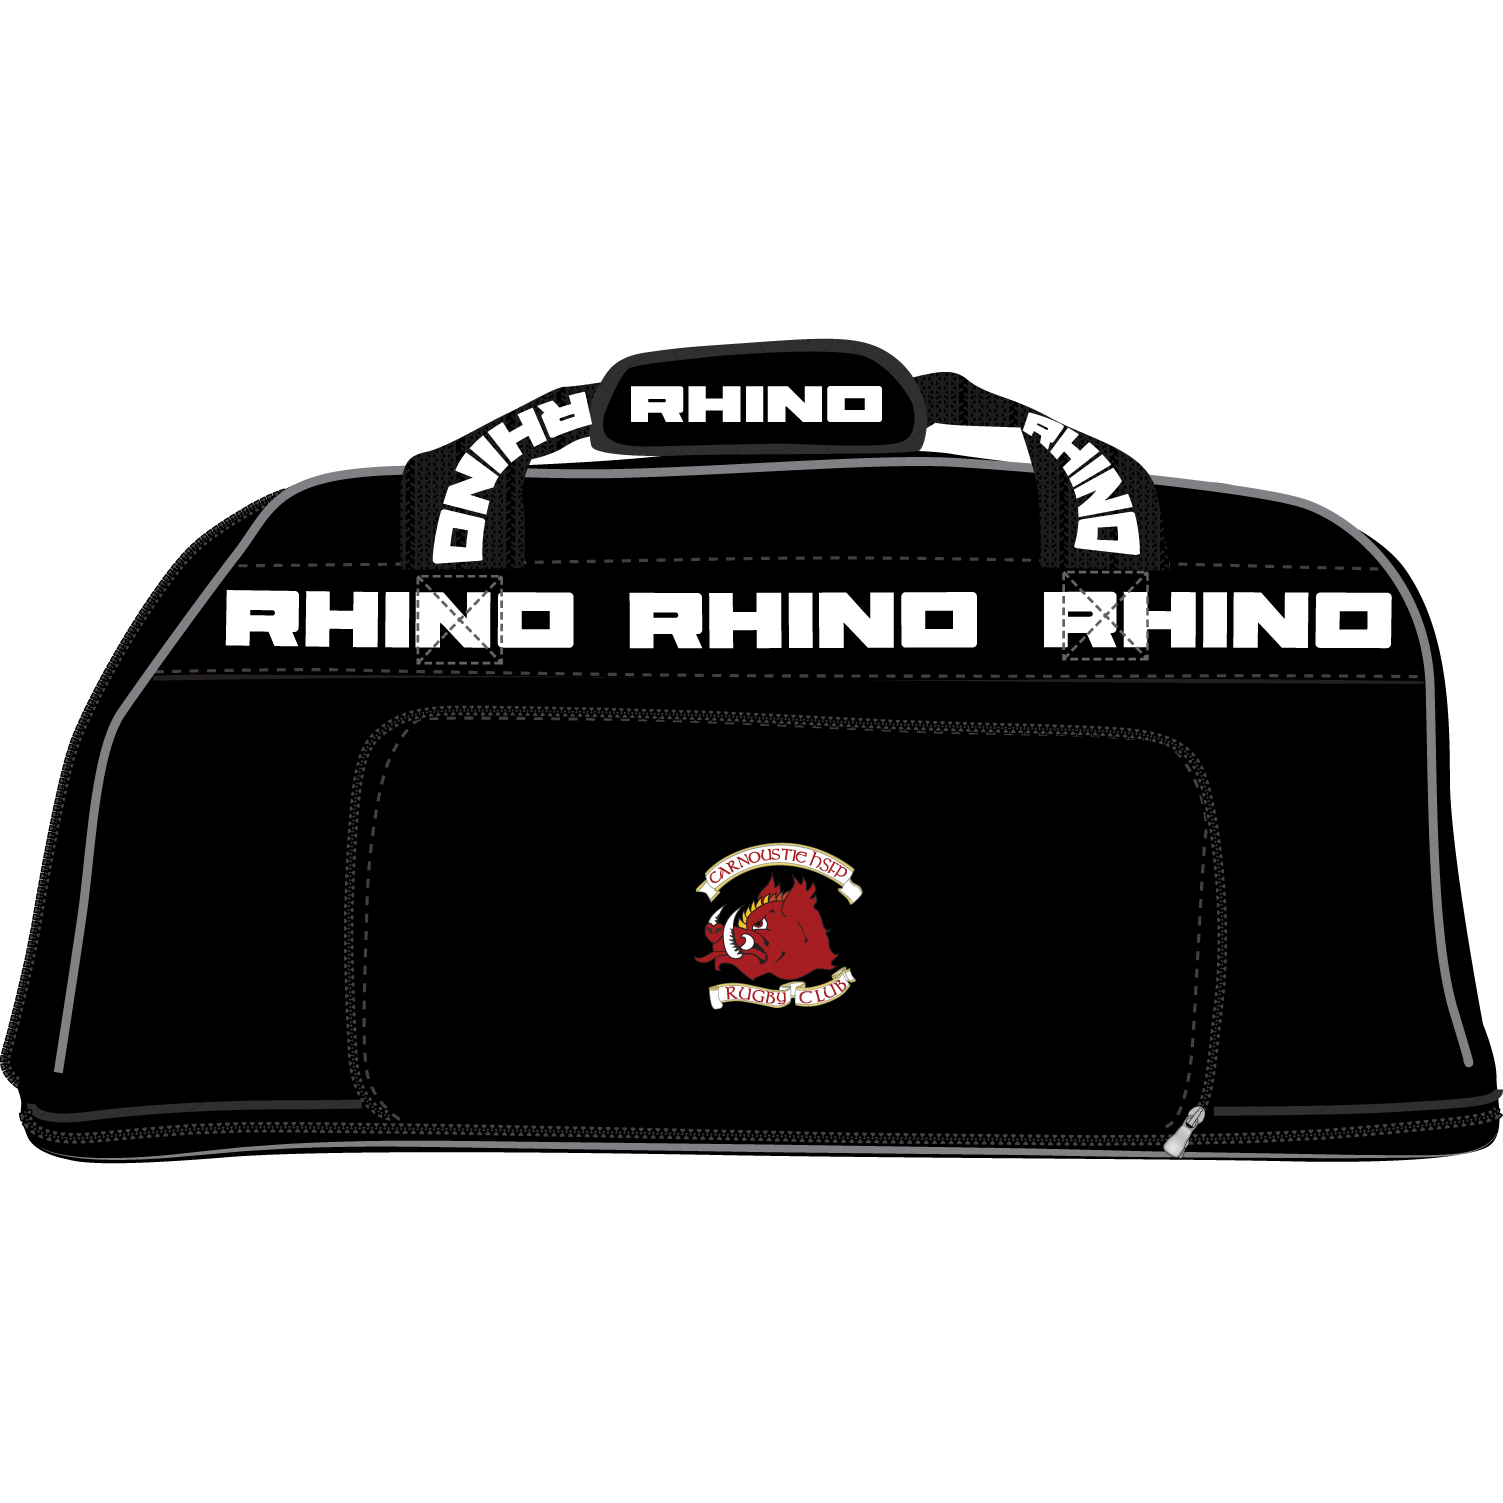 Carnoustie HSFP Players Bag - Rhino Direct